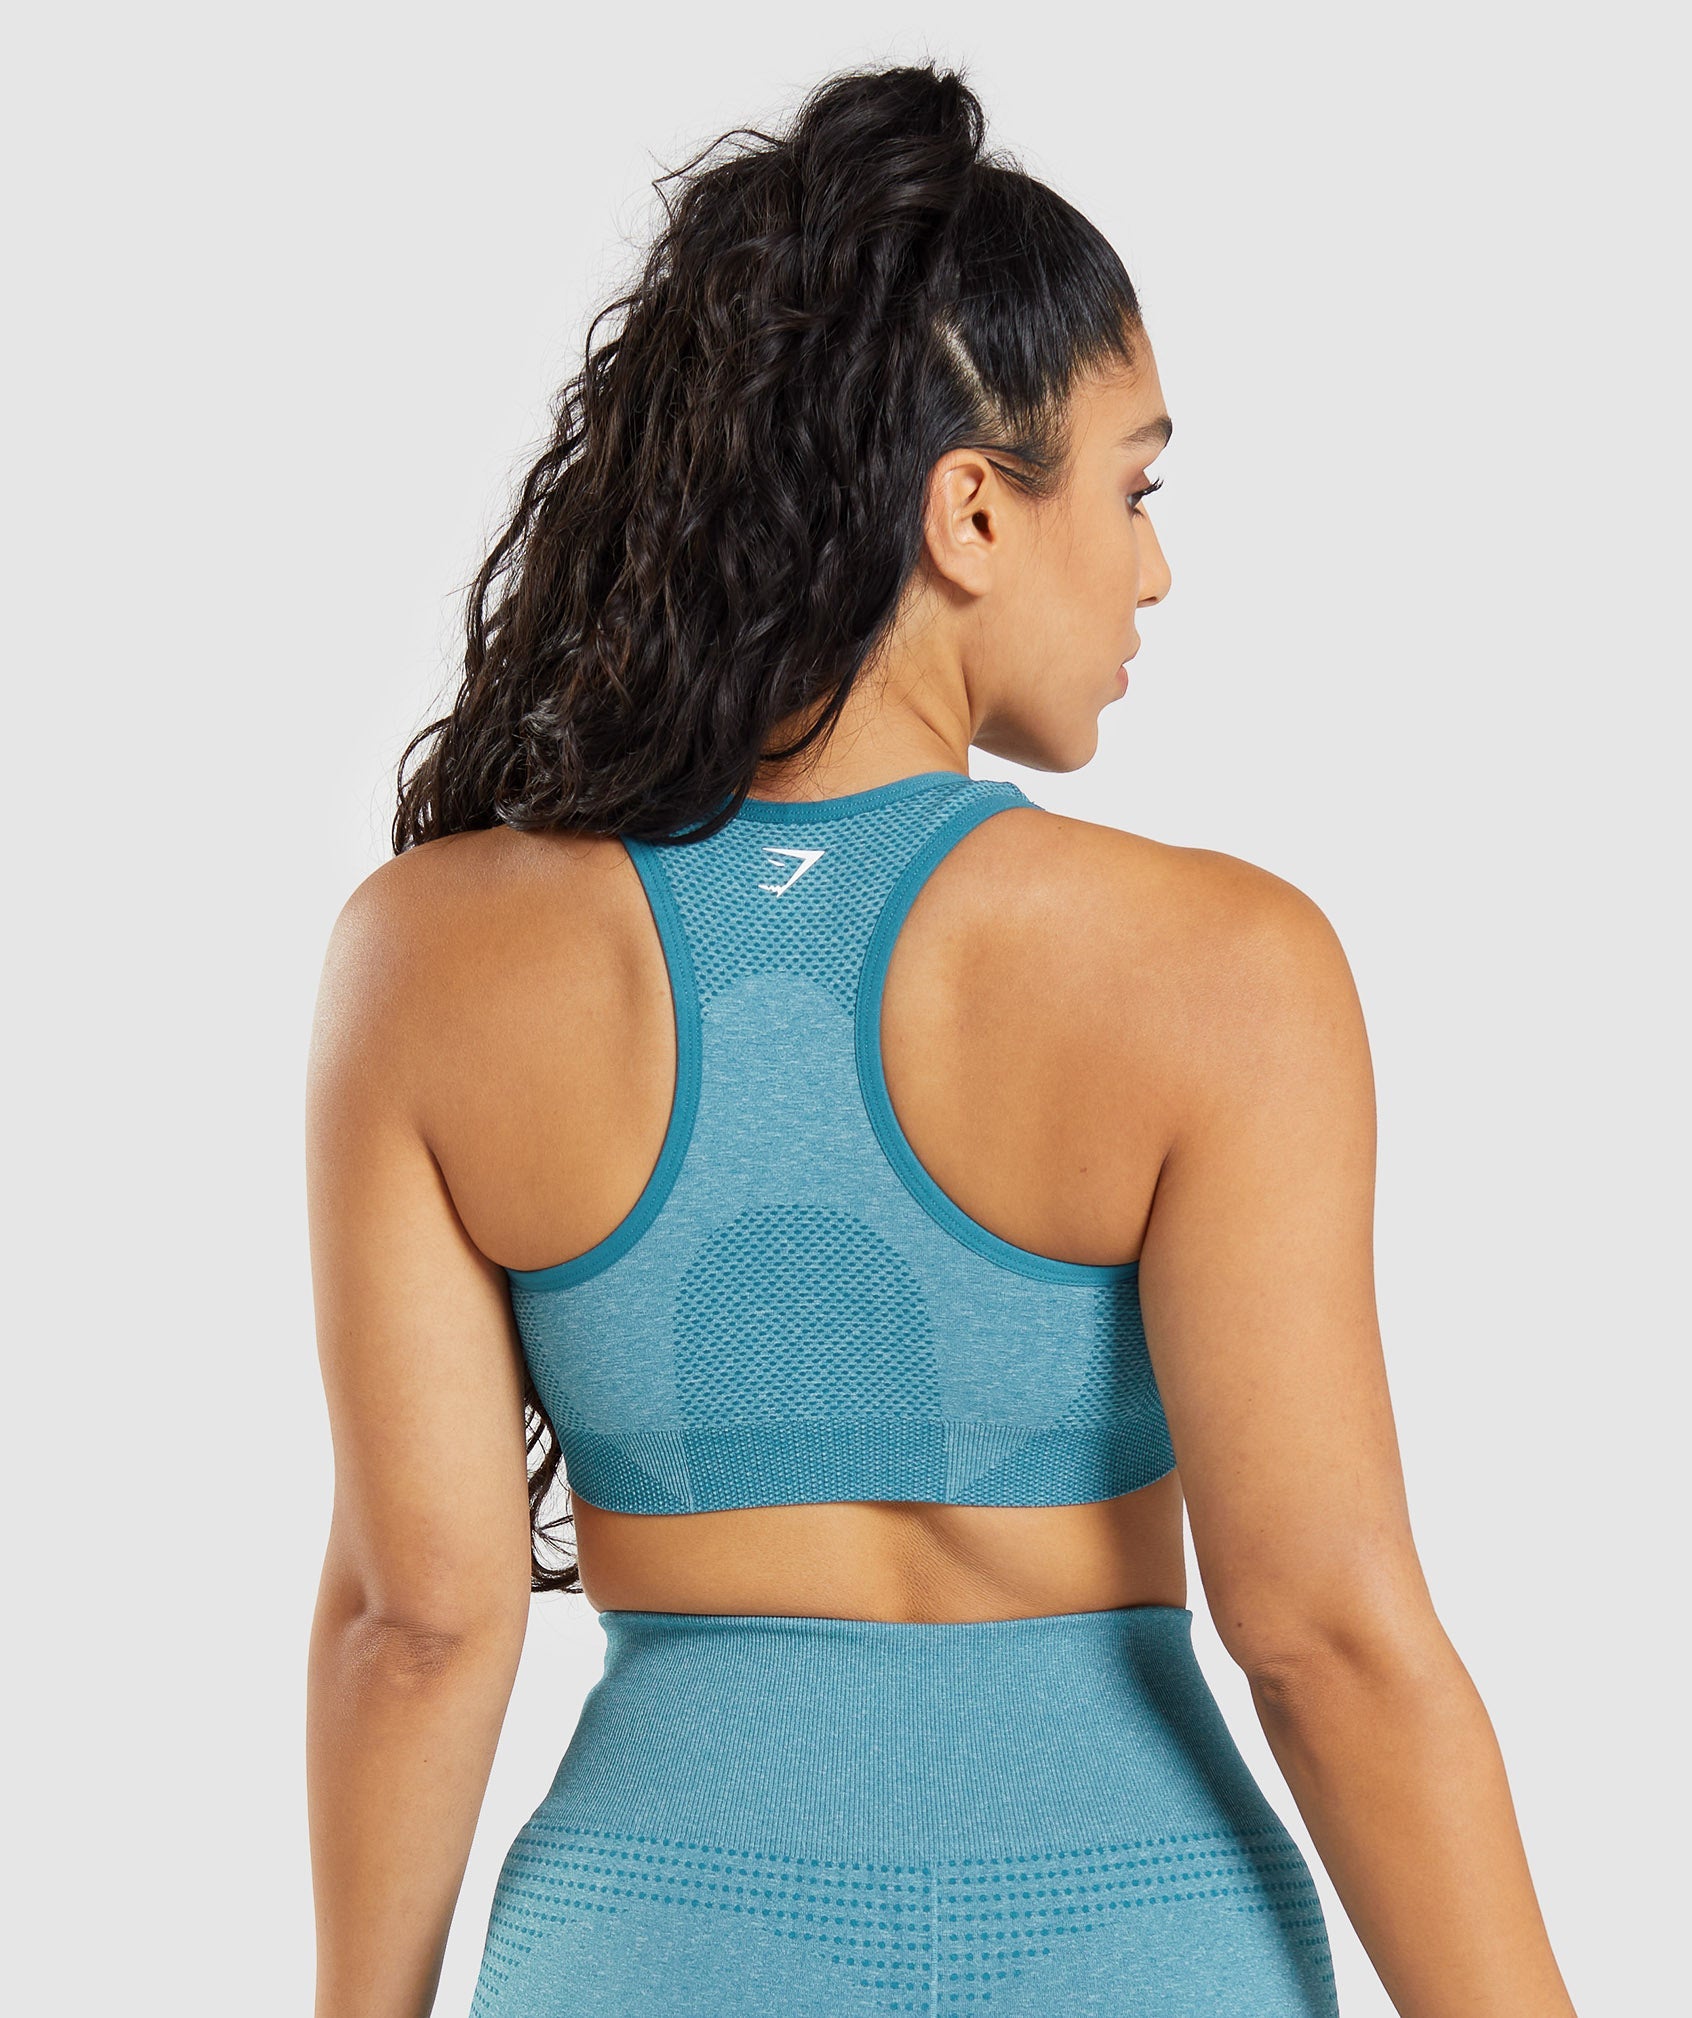 Gymshark Sports Bra Blue Size XS - $33 New With Tags - From Nika